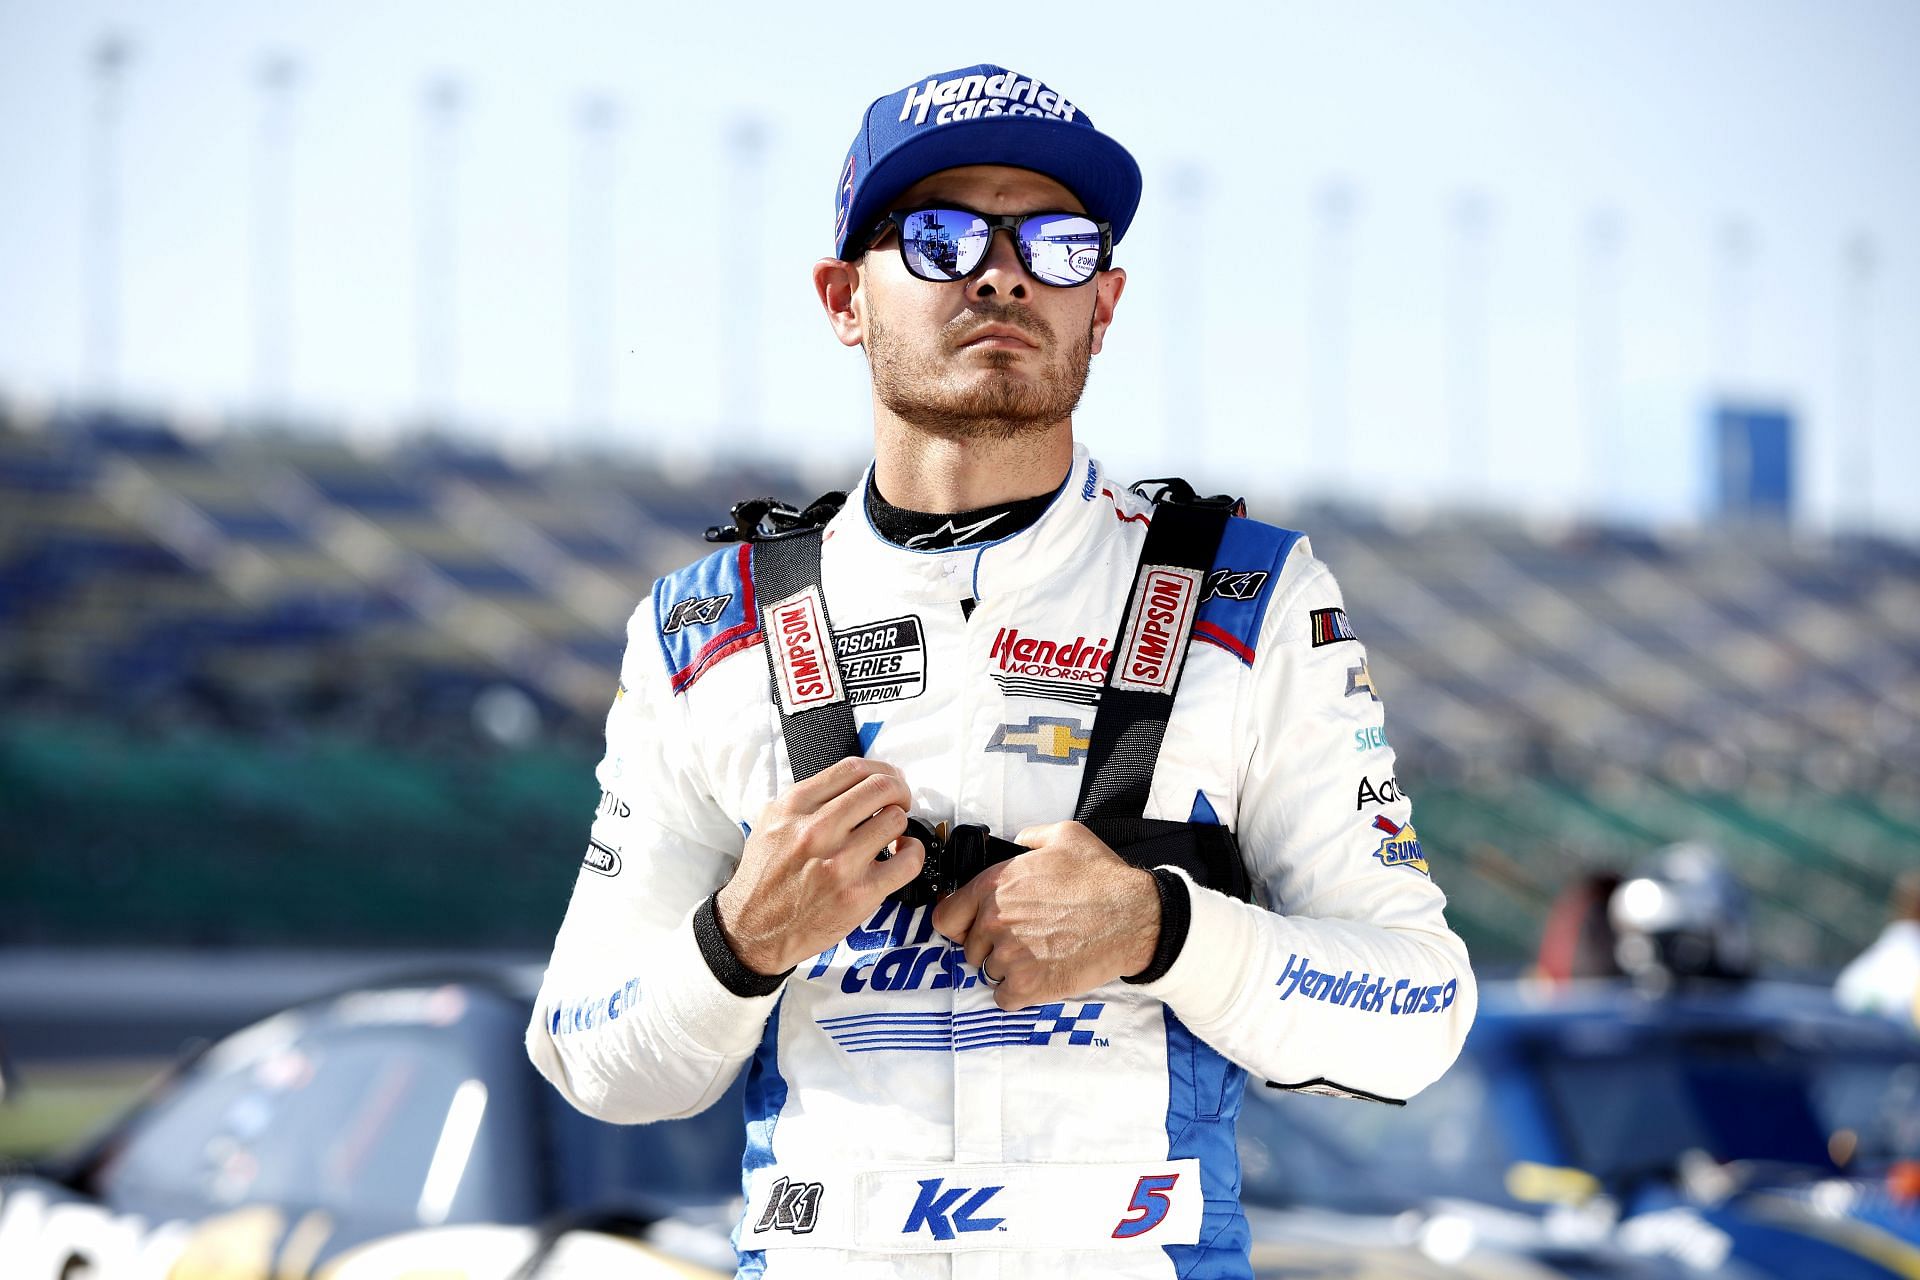 Kyle Larson looks on during qualifying for the NASCAR Cup Series AdventHealth 400 at Kansas Speedway.